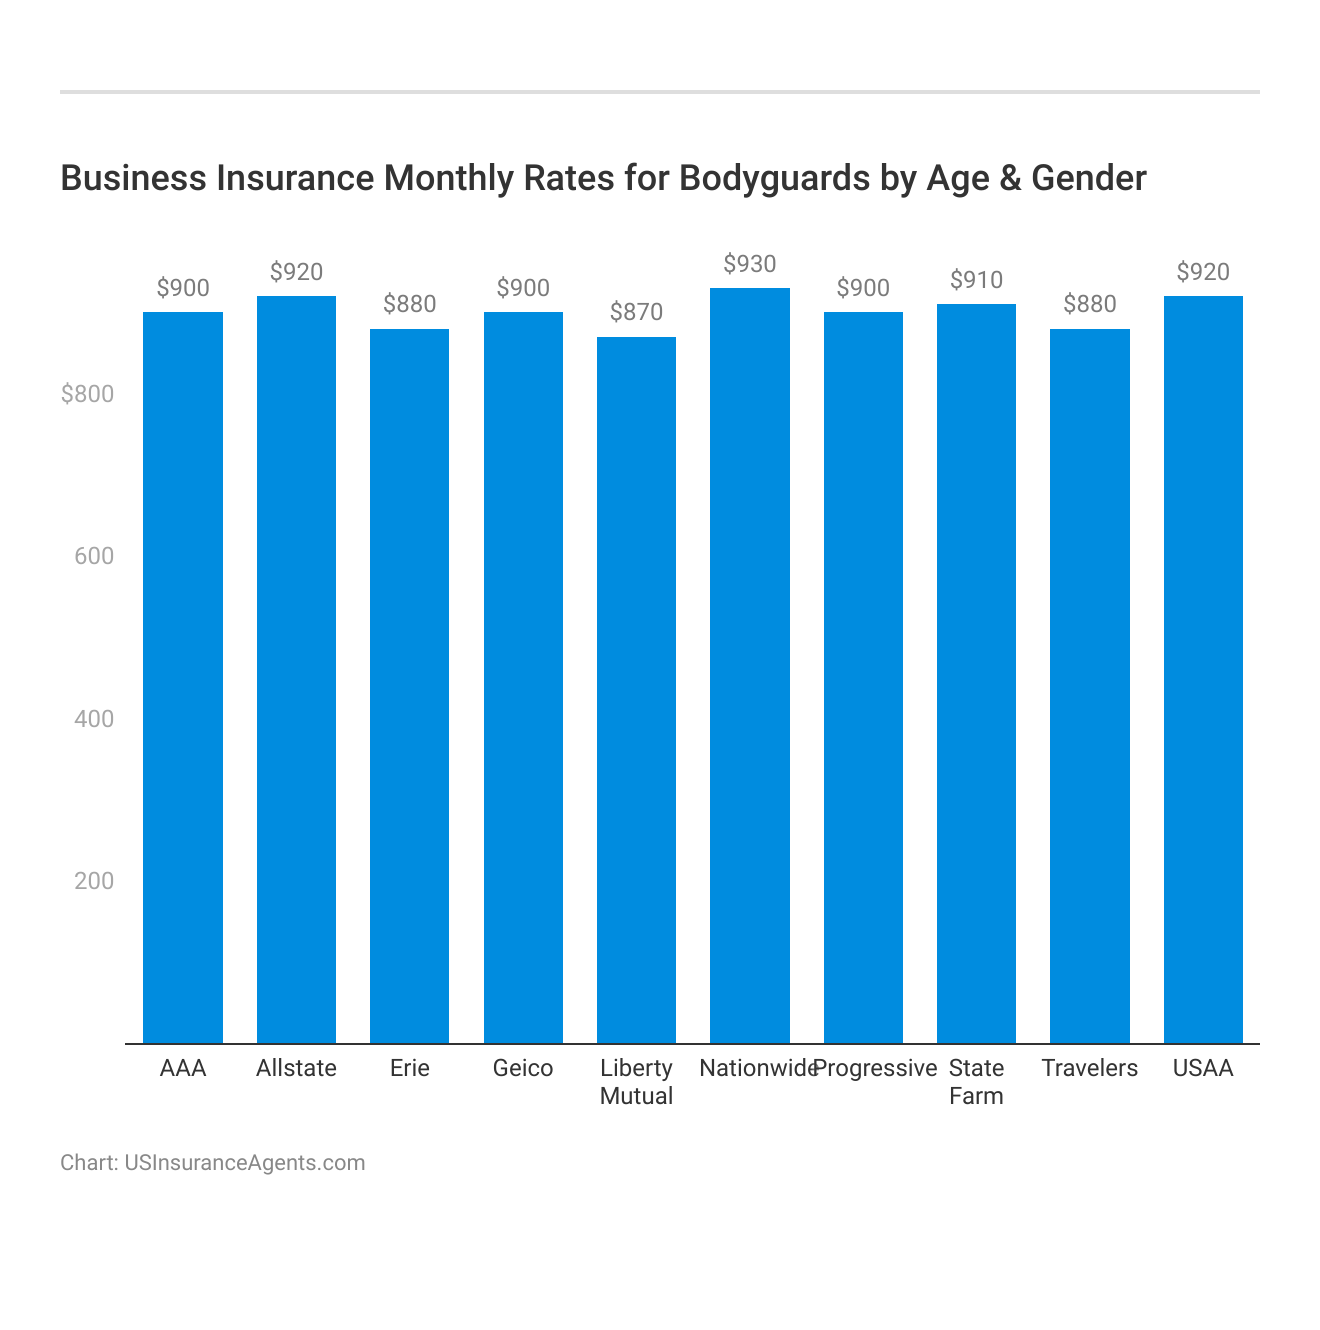 <h3>Business Insurance Monthly Rates for Bodyguards by Age & Gender</h3>